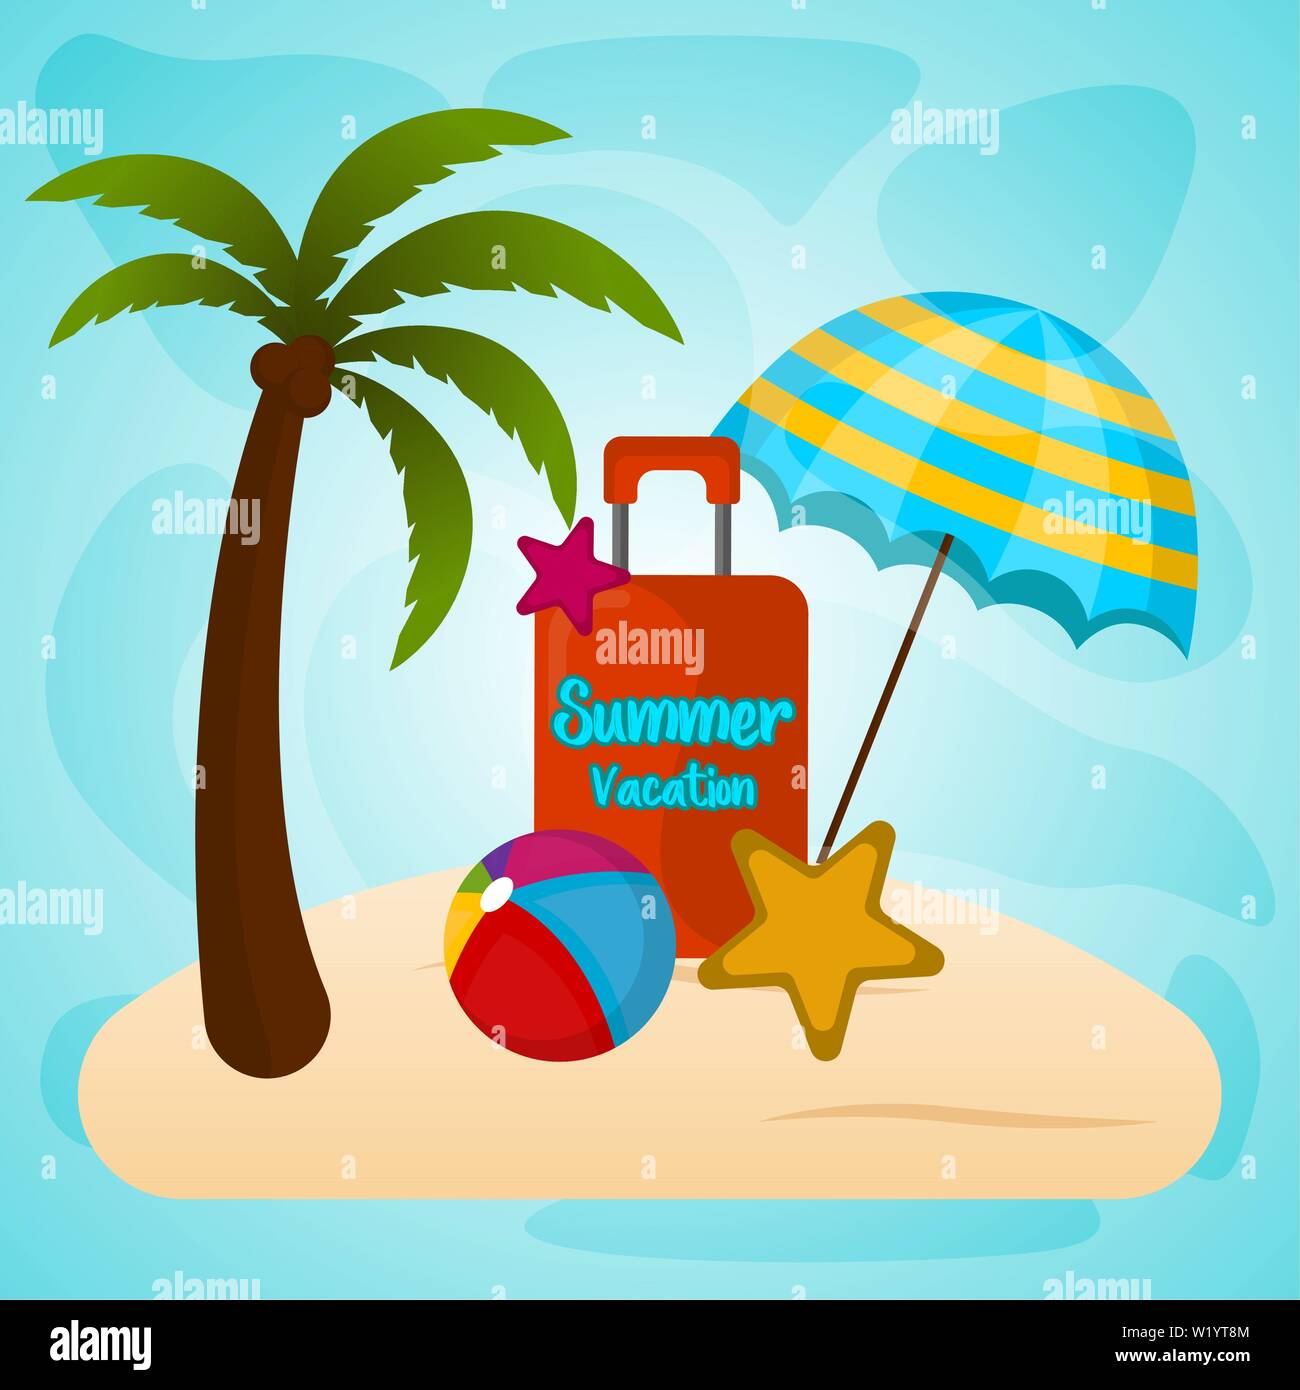 Sumer vacation image with a beach objects, starfish and travel bag on a ...